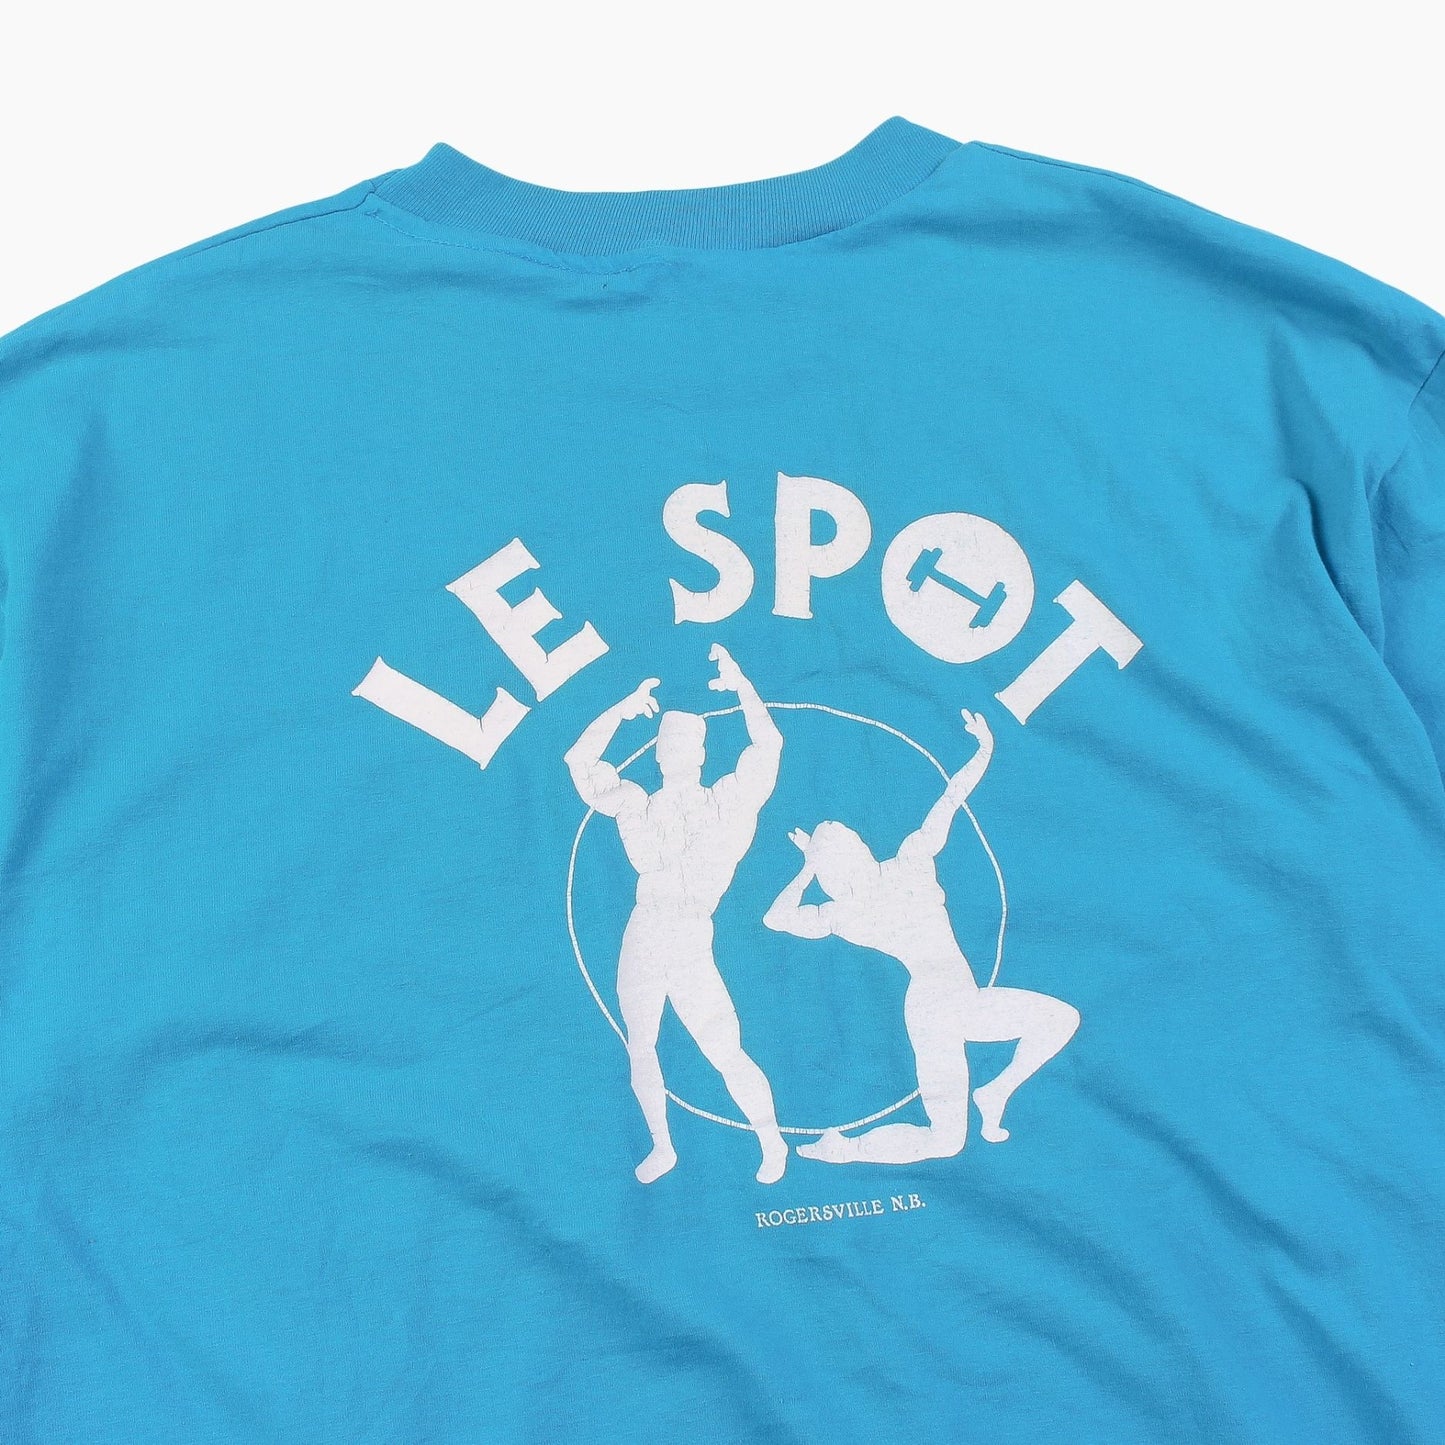 Vintage 'Le Spot' T-Shirt - American Madness